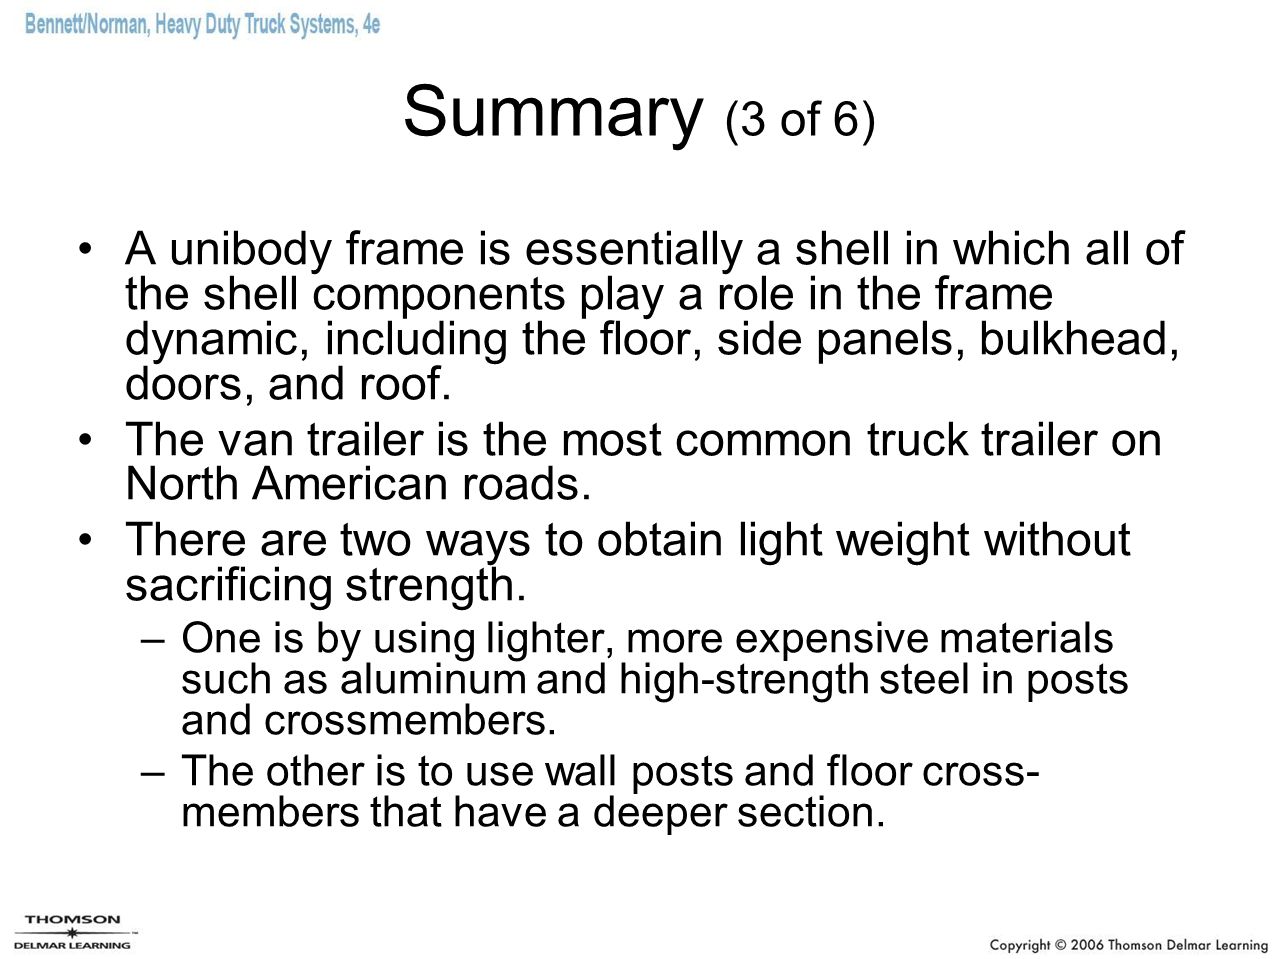 Summary (3 of 6) A unibody frame is essentially a shell in which all of the shell components play a role in the frame dynamic, including the floor, side panels, bulkhead, doors, and roof.